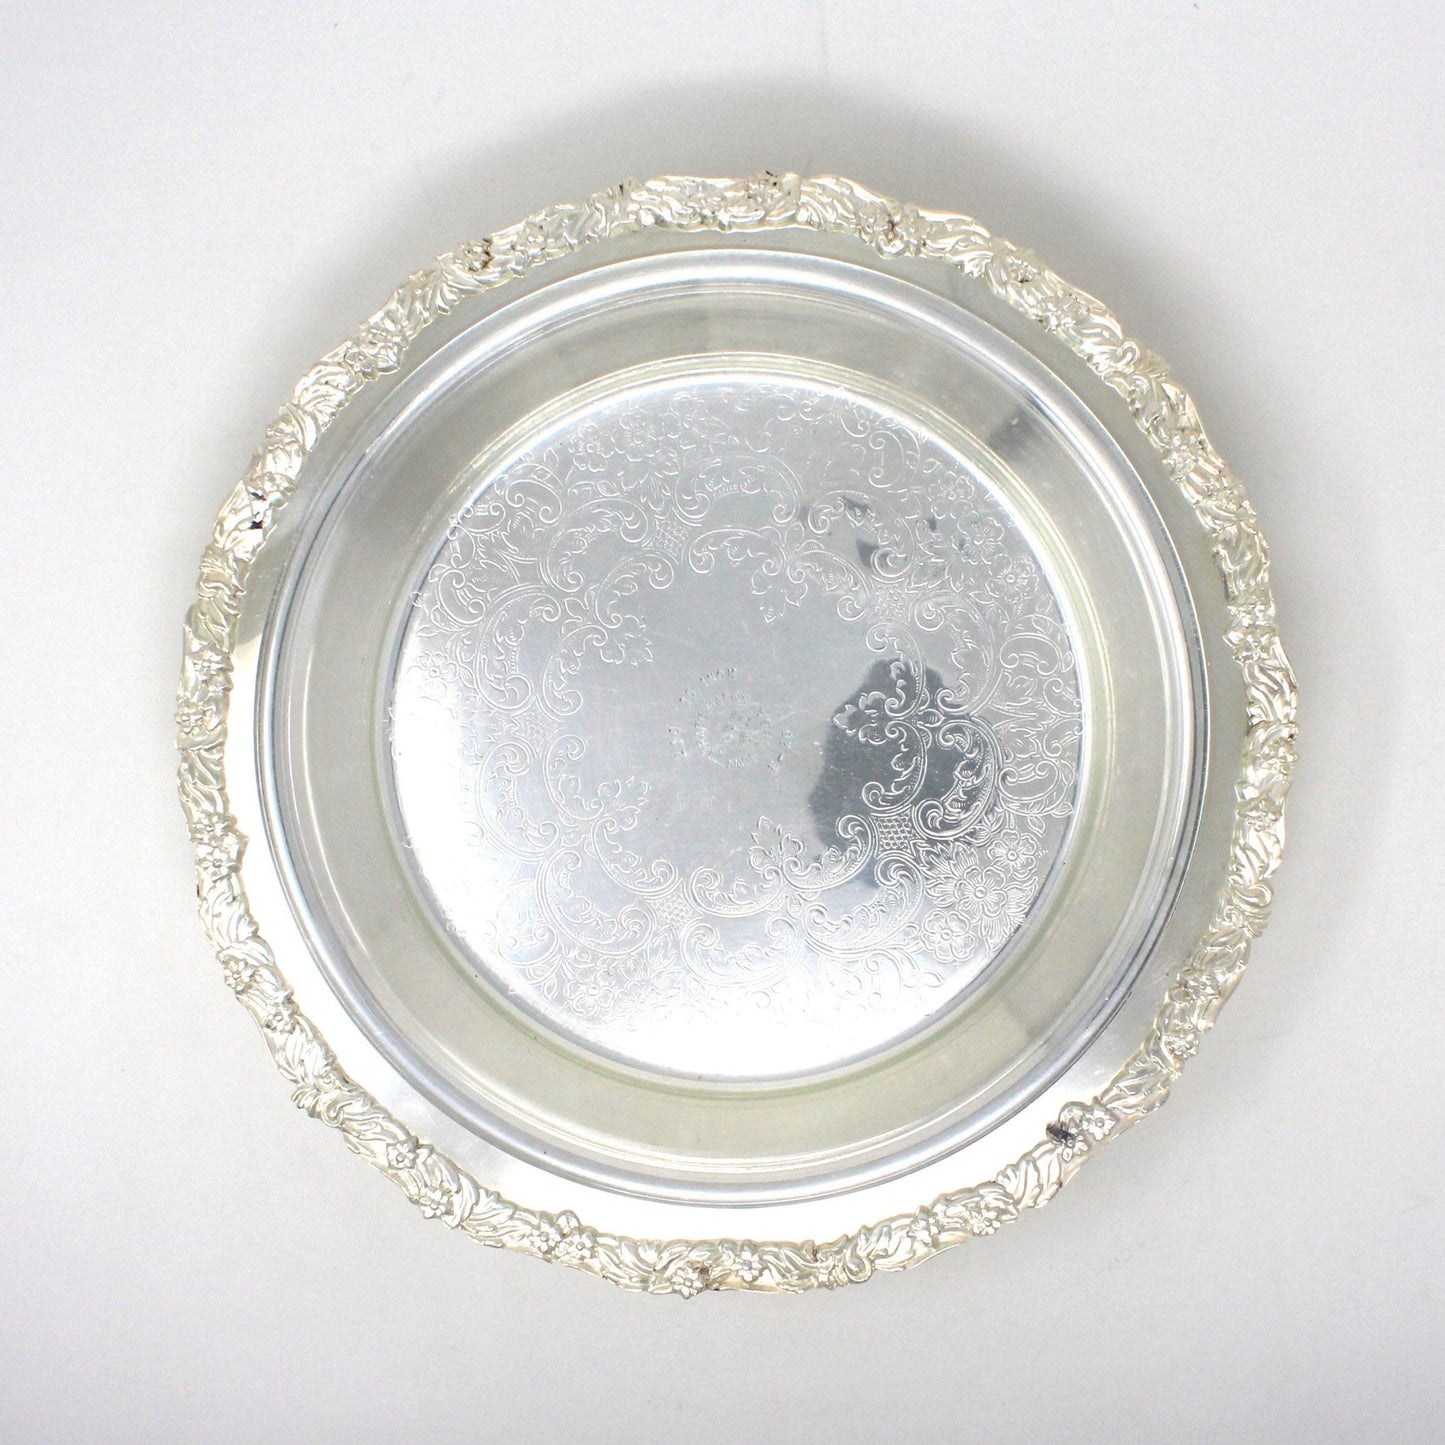 Silver plated Footed Pie Plate with Glass Liner, Vintage